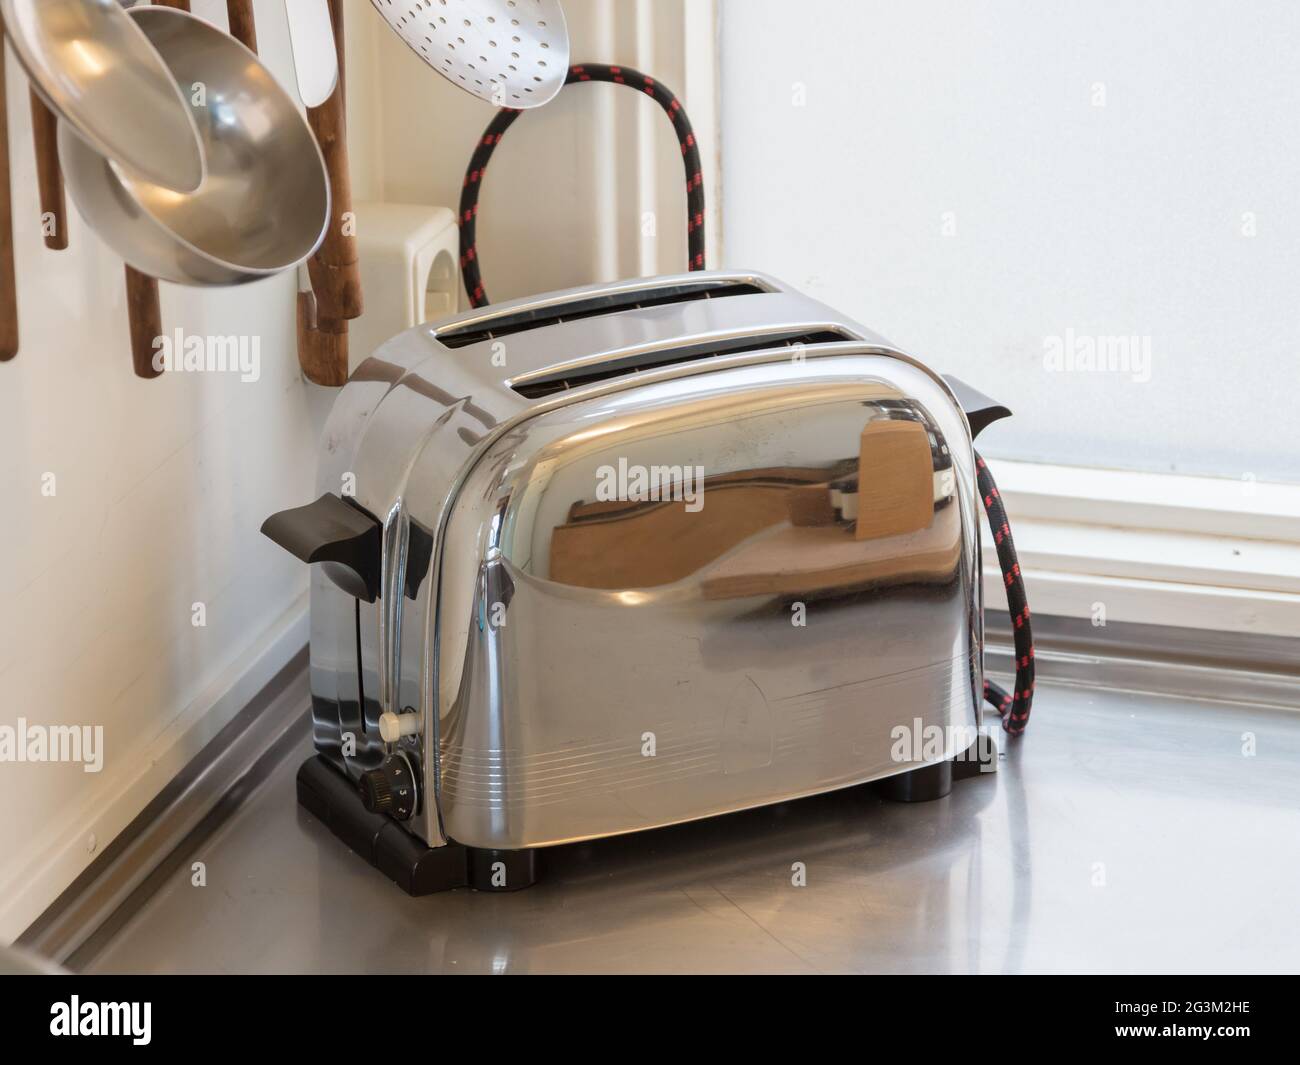 https://c8.alamy.com/comp/2G3M2HE/vintage-toaster-in-a-kitchen-2G3M2HE.jpg